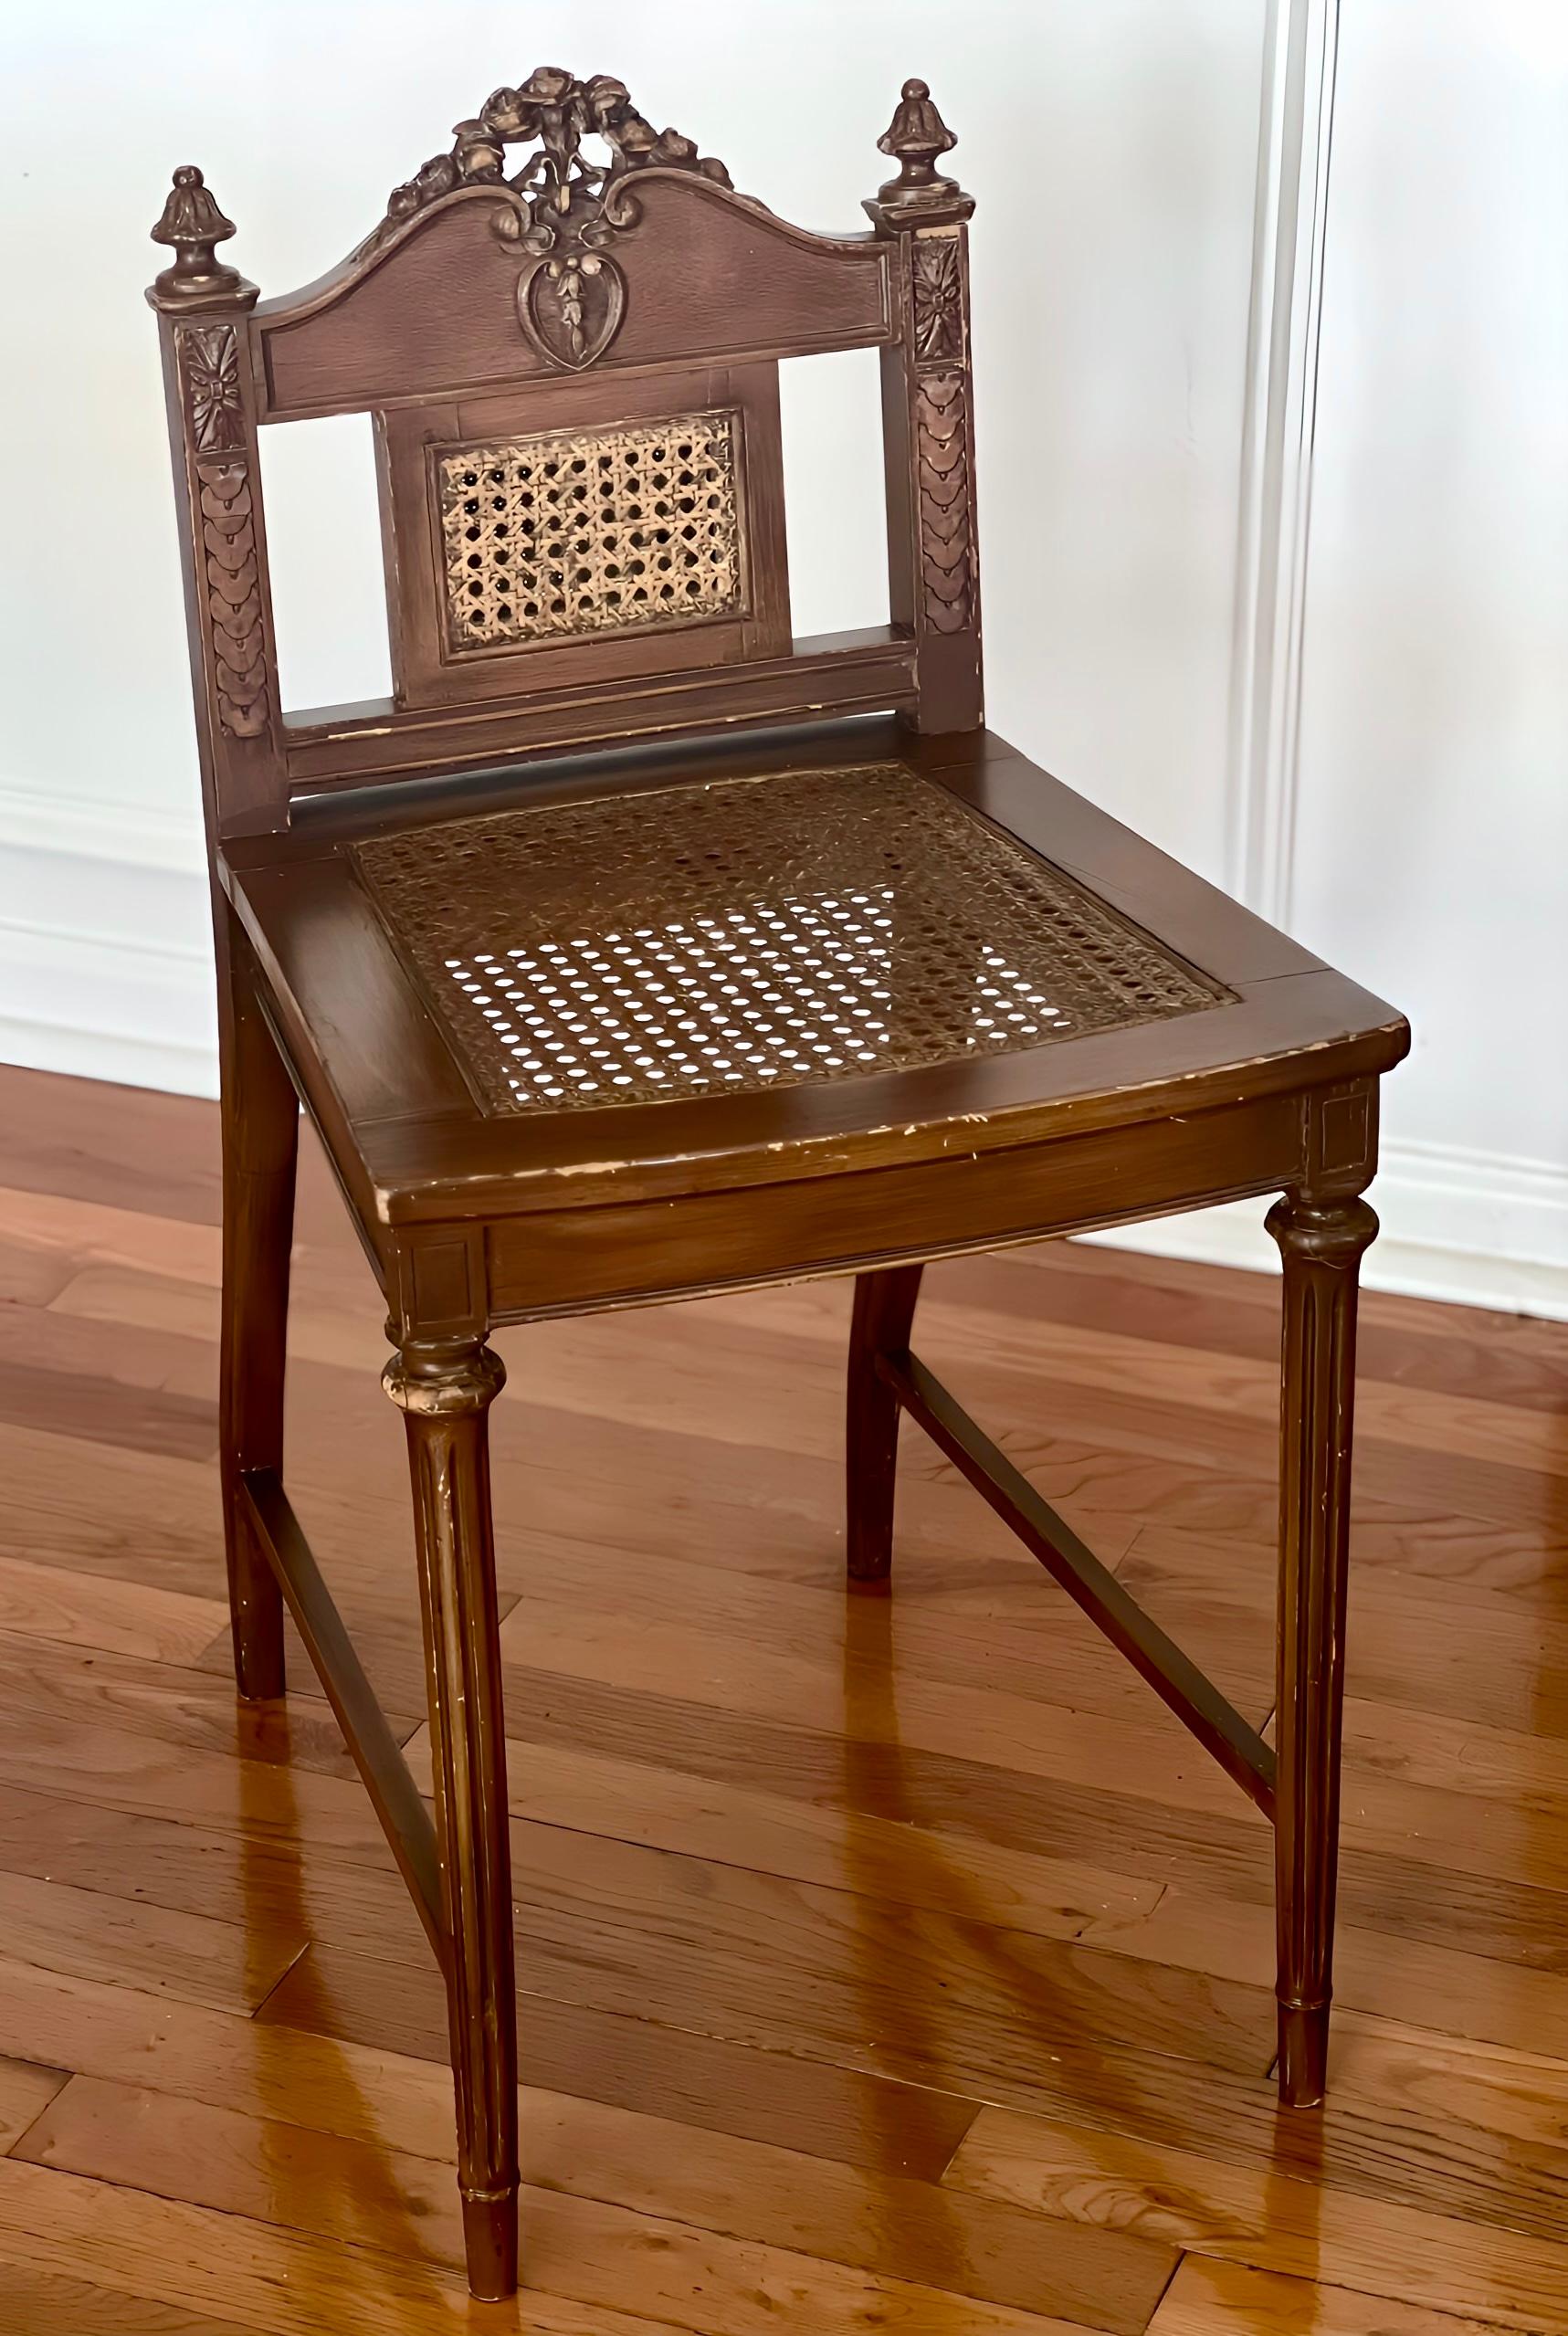 French Louis XVI style caned seat and back carved oak vanity chair, c. 1920.

Charming chair beautifully carved with central rosettes, ribbon swag, acanthus leaf finials and scrolled details. It is set upon fluted tapered front legs and shapely back